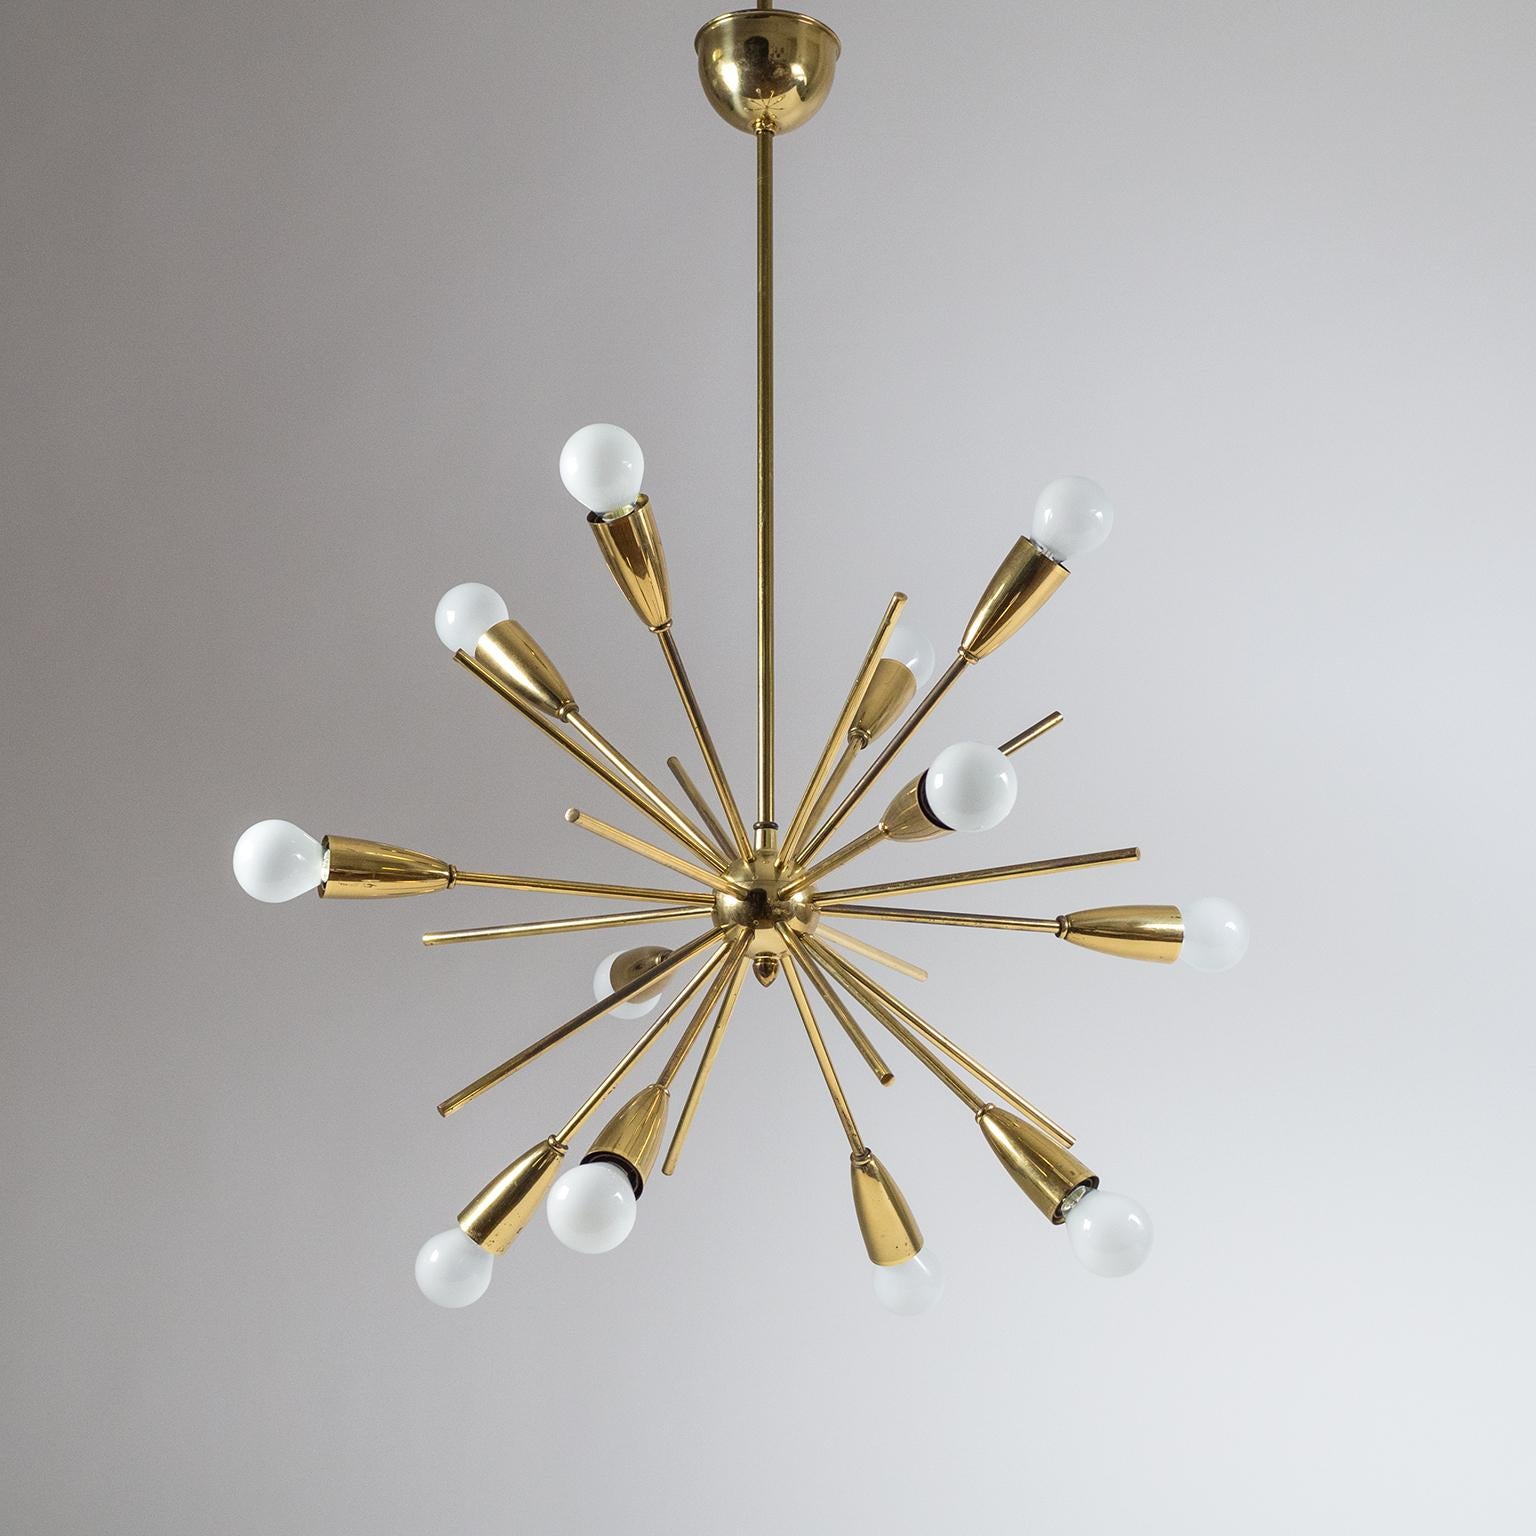 Excellent all brass 12-light Sputnik chandelier form the 1950s. In addition to the arms with bulbs there are 12 slightly shorter brass rods mixed in, giving this chandelier a very dynamic 'star burst' quality. Very nice original condition with a